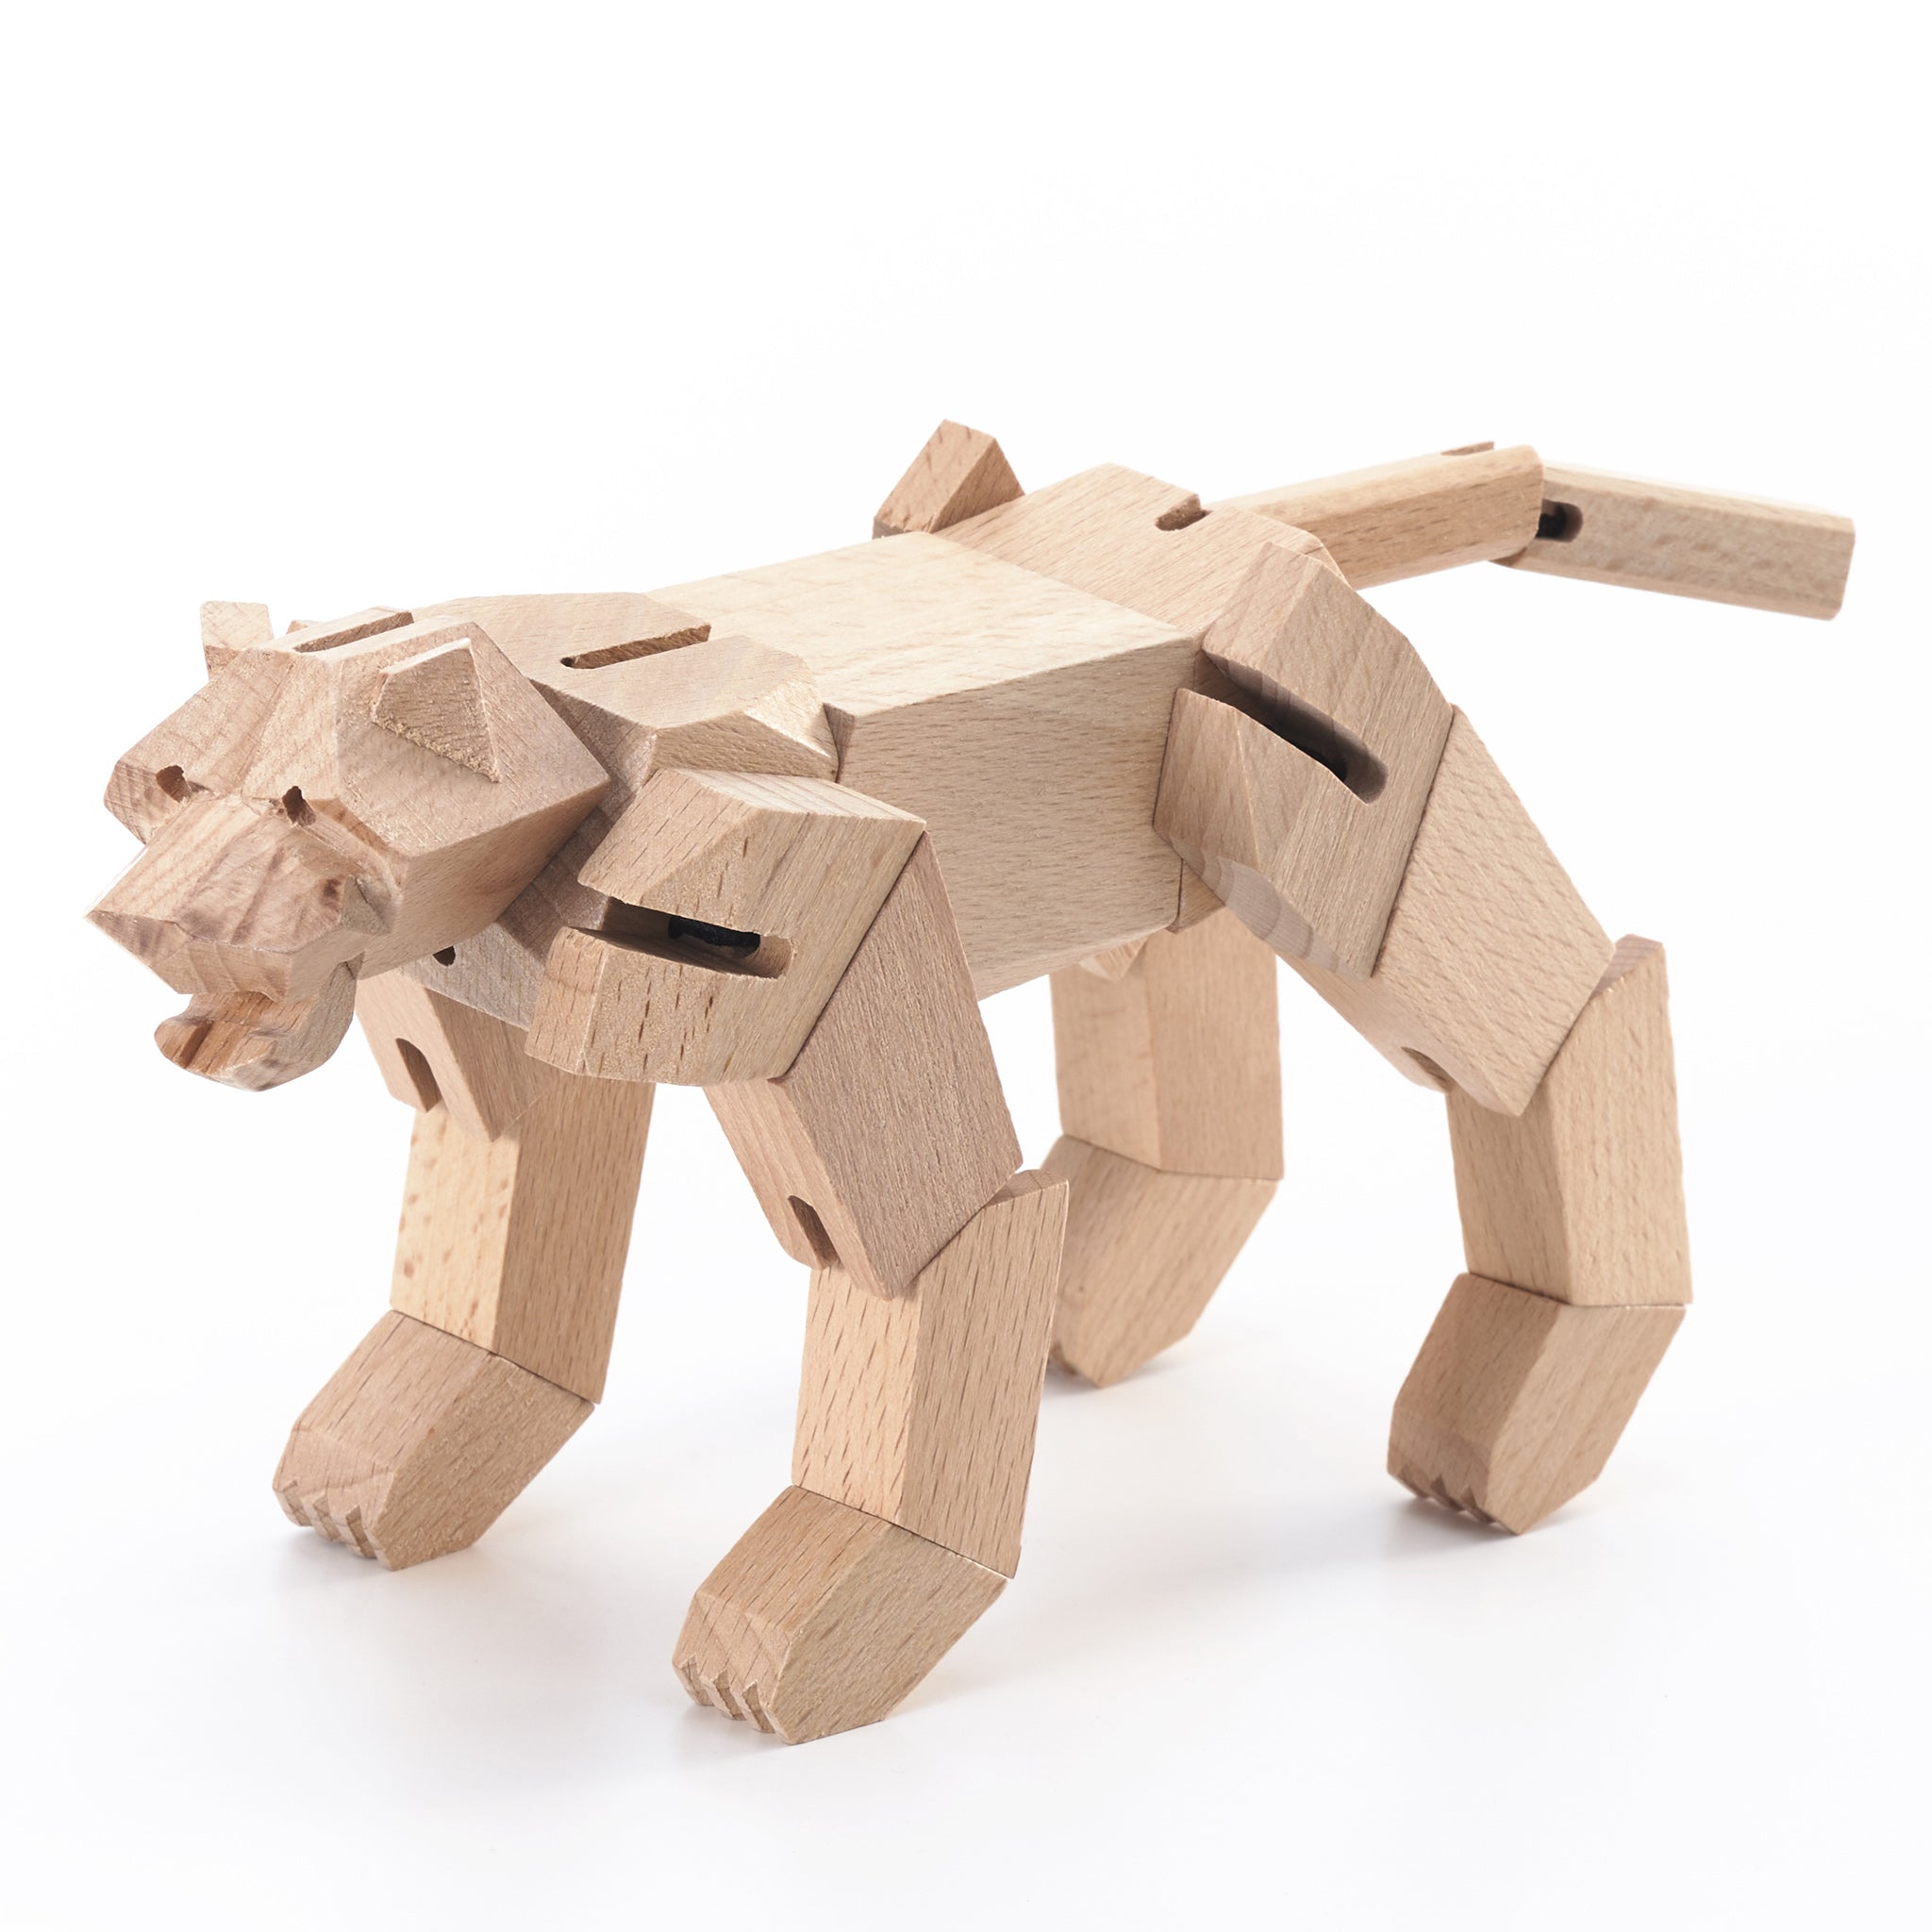 Morphits ® Tiger Wooden Toy: Roaring Adventures Await in our Wooden Playset